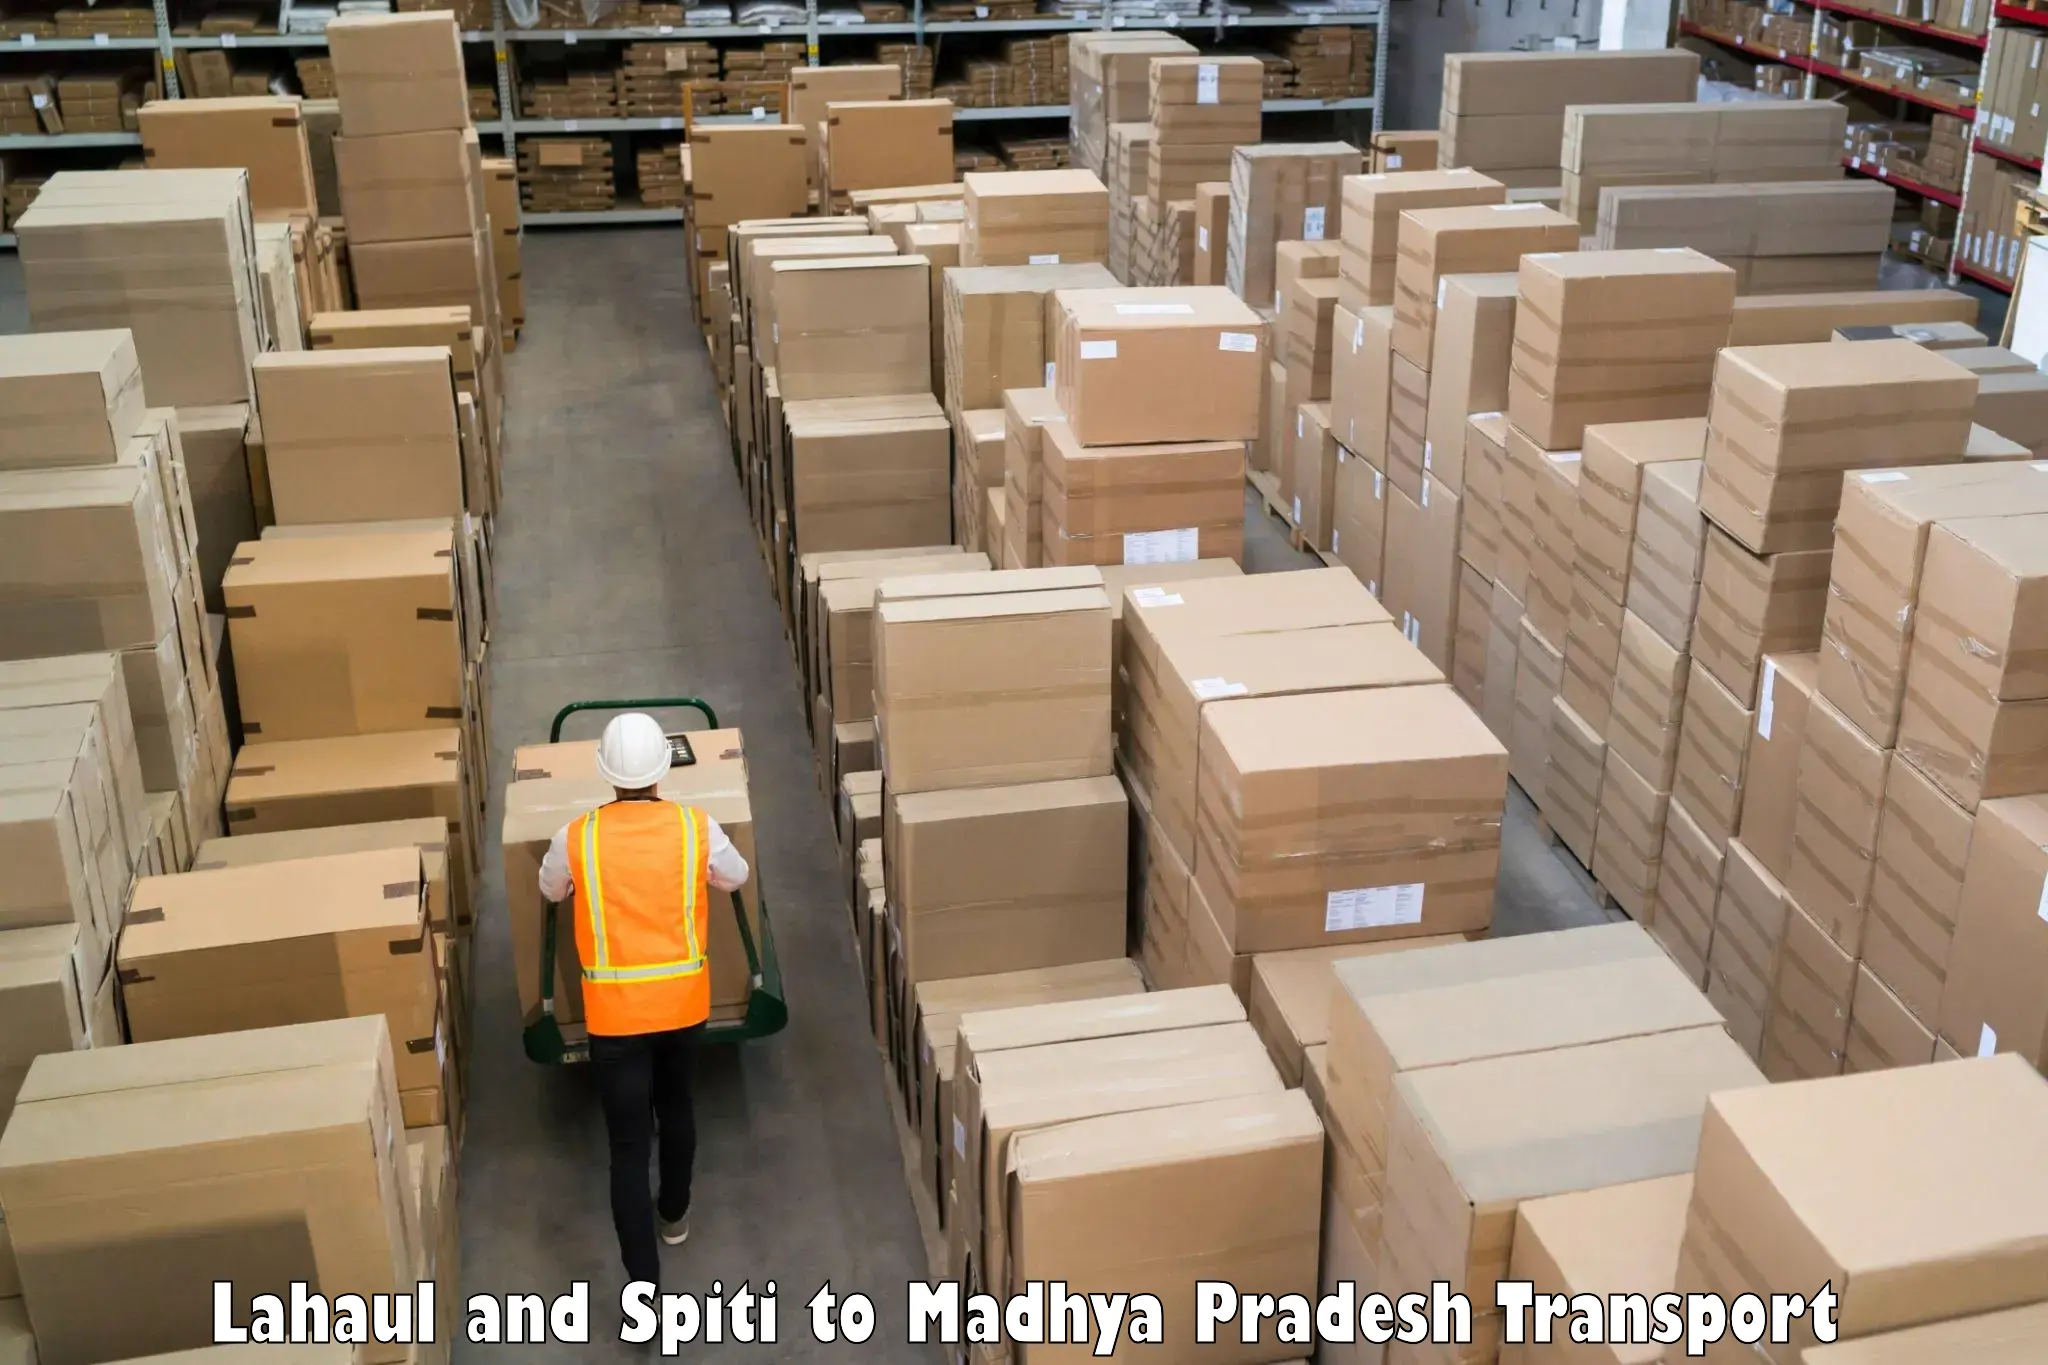 Furniture transport service Lahaul and Spiti to Pachore